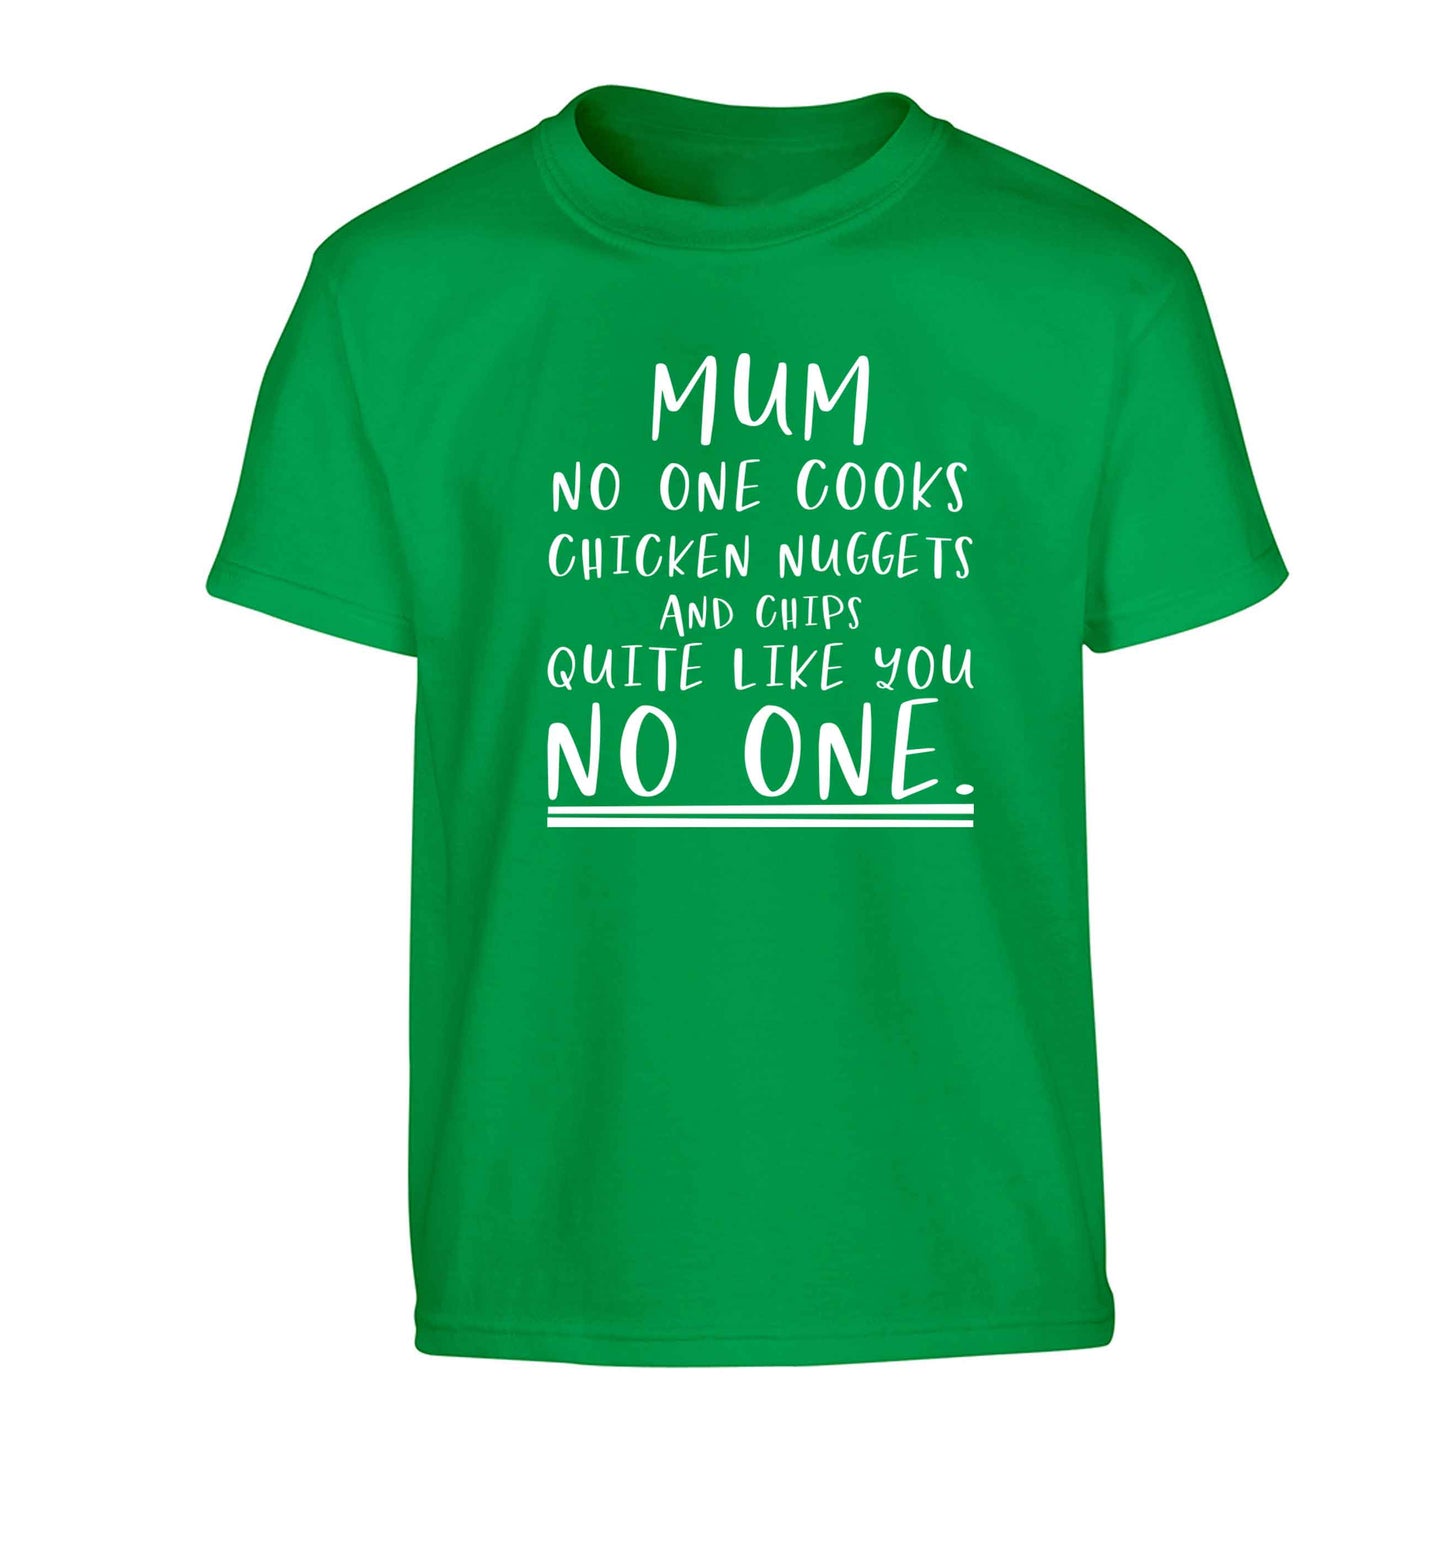 Super funny sassy gift for mother's day or birthday!  Mum no one cooks chicken nuggets and chips like you no one Children's green Tshirt 12-13 Years